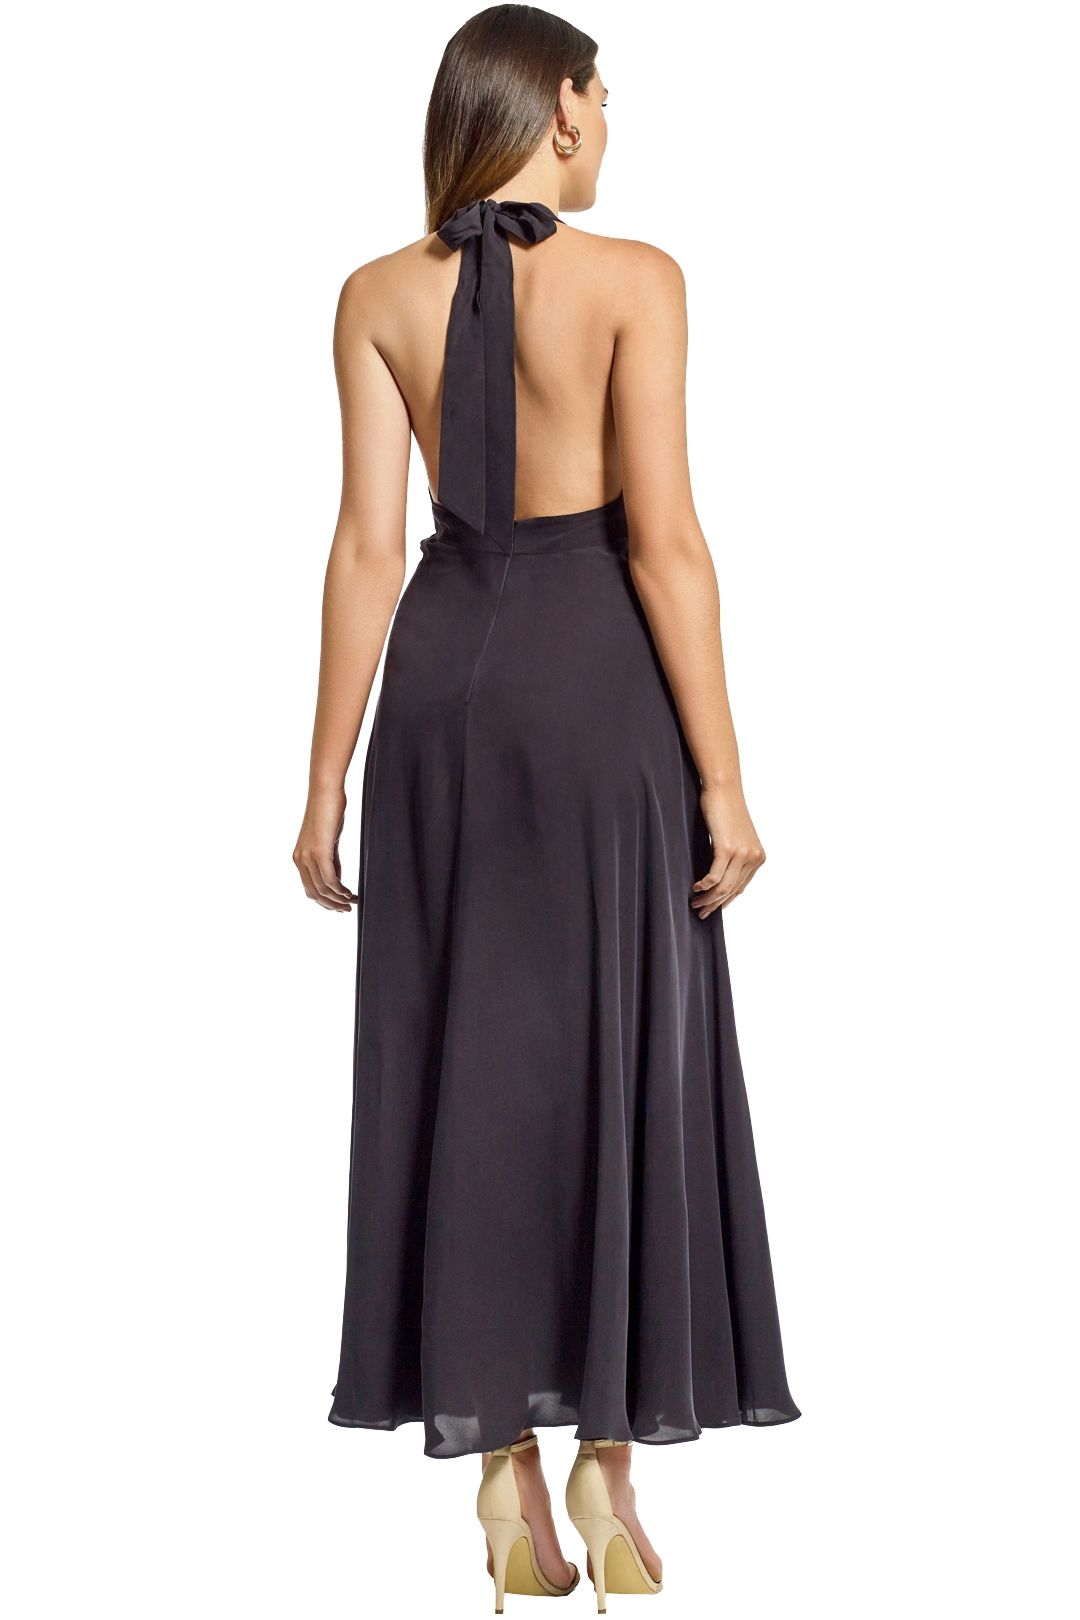 Milly - Charlie Gown - Black - Back